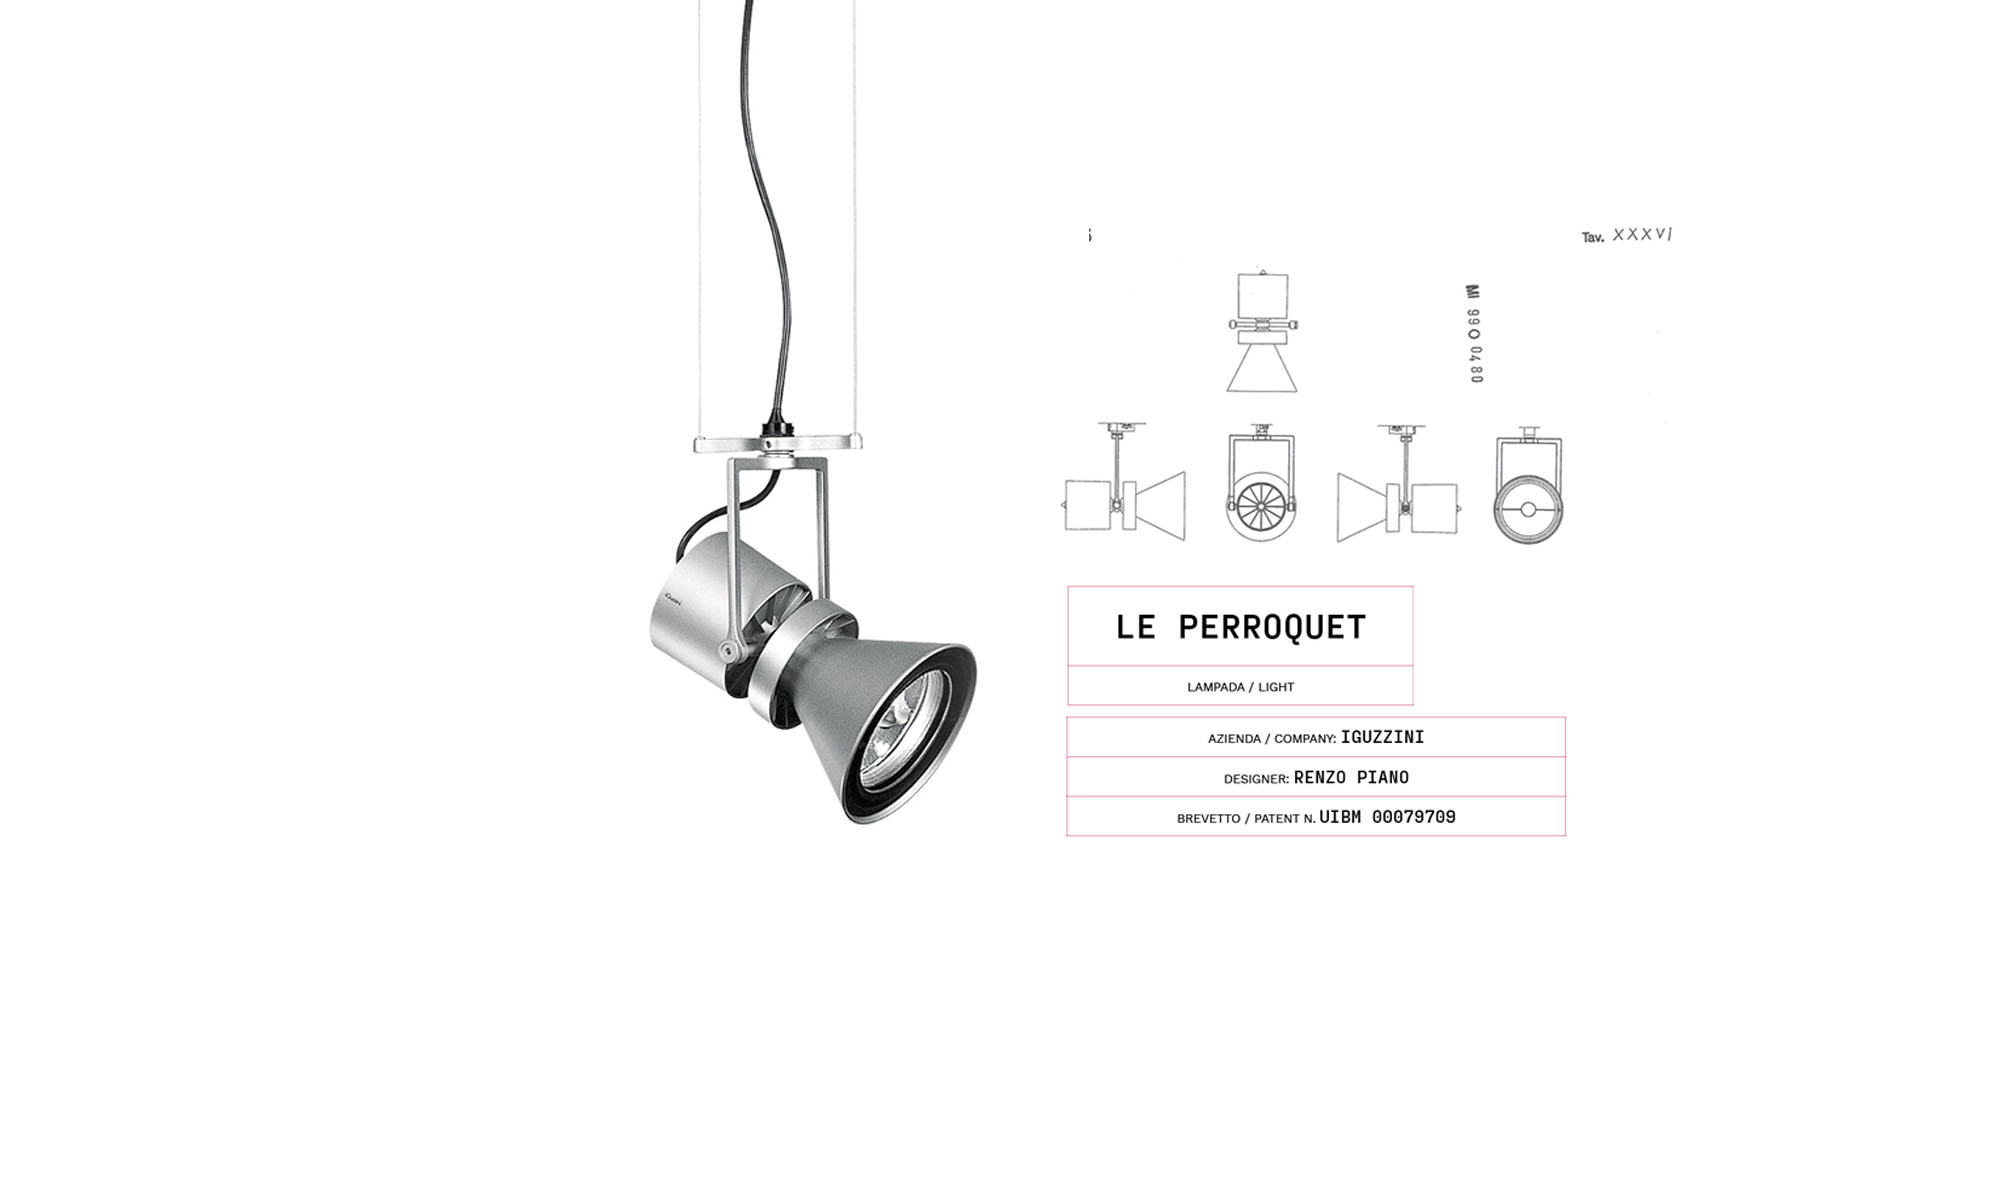 Le Perroquet by iGuzzini selected for The Italian Genius exhibition at the MISE headquarters